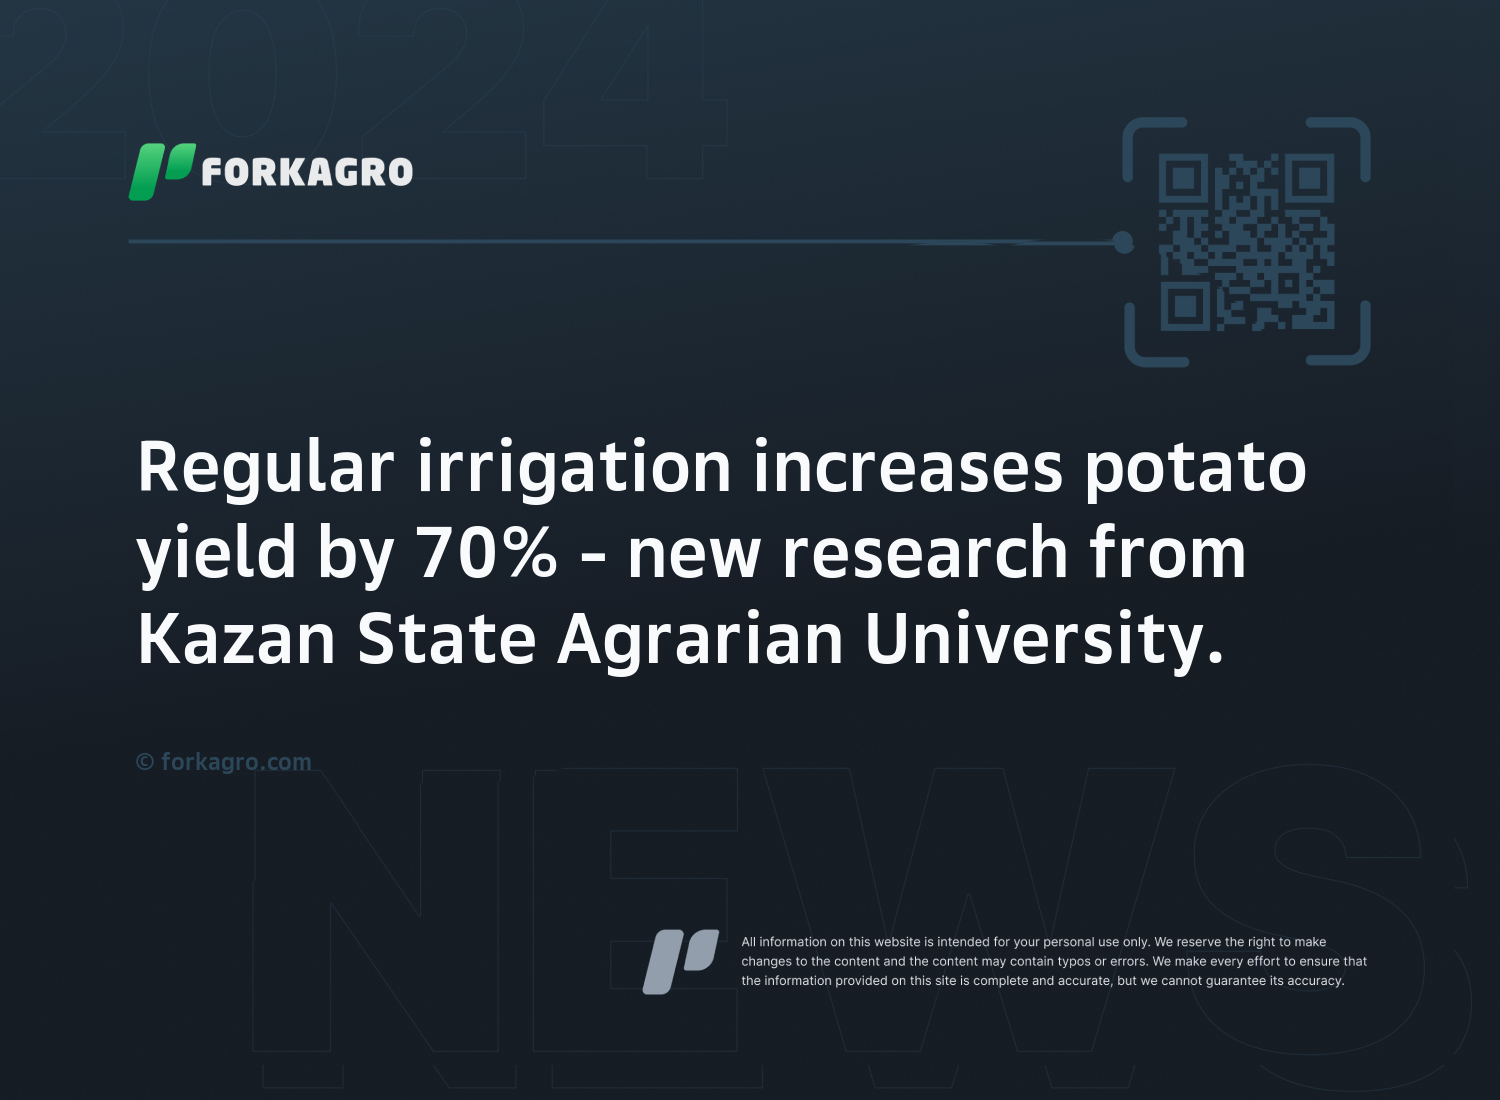 Regular irrigation increases potato yield by 70% - new research from Kazan State Agrarian University.